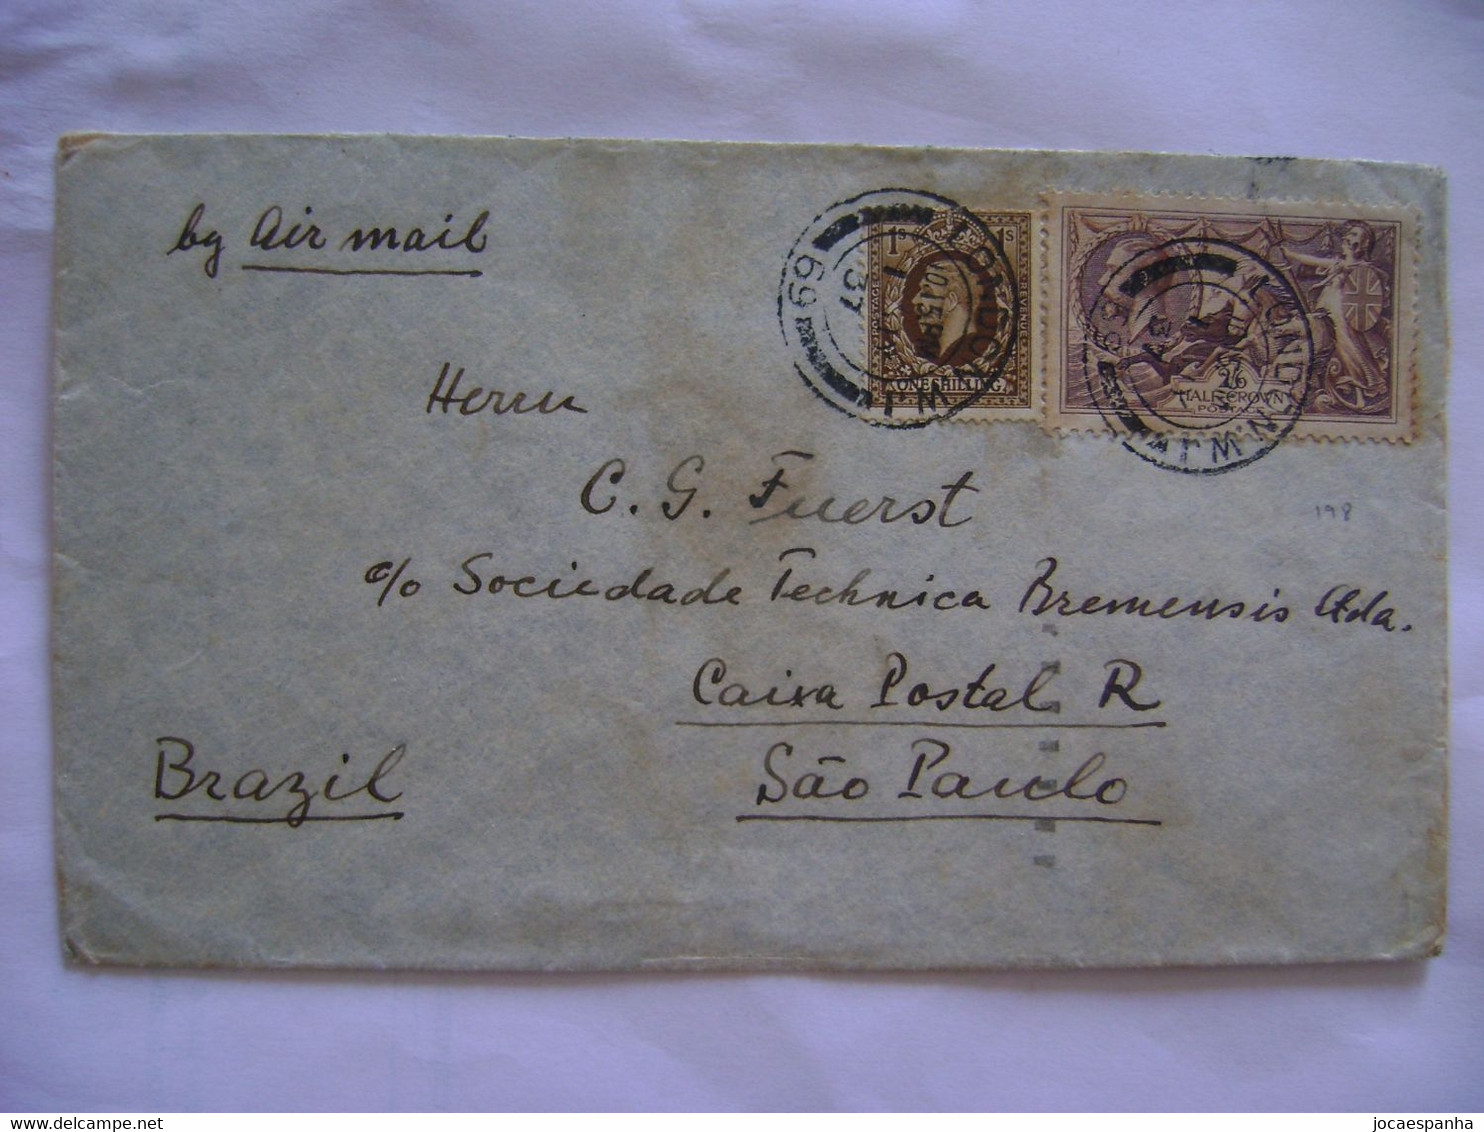 ENGLAND - LETTER SENT FROM LONDON TO SAO PAULO (BRAZIL) IN 1937 IN THE STATE - Briefe U. Dokumente